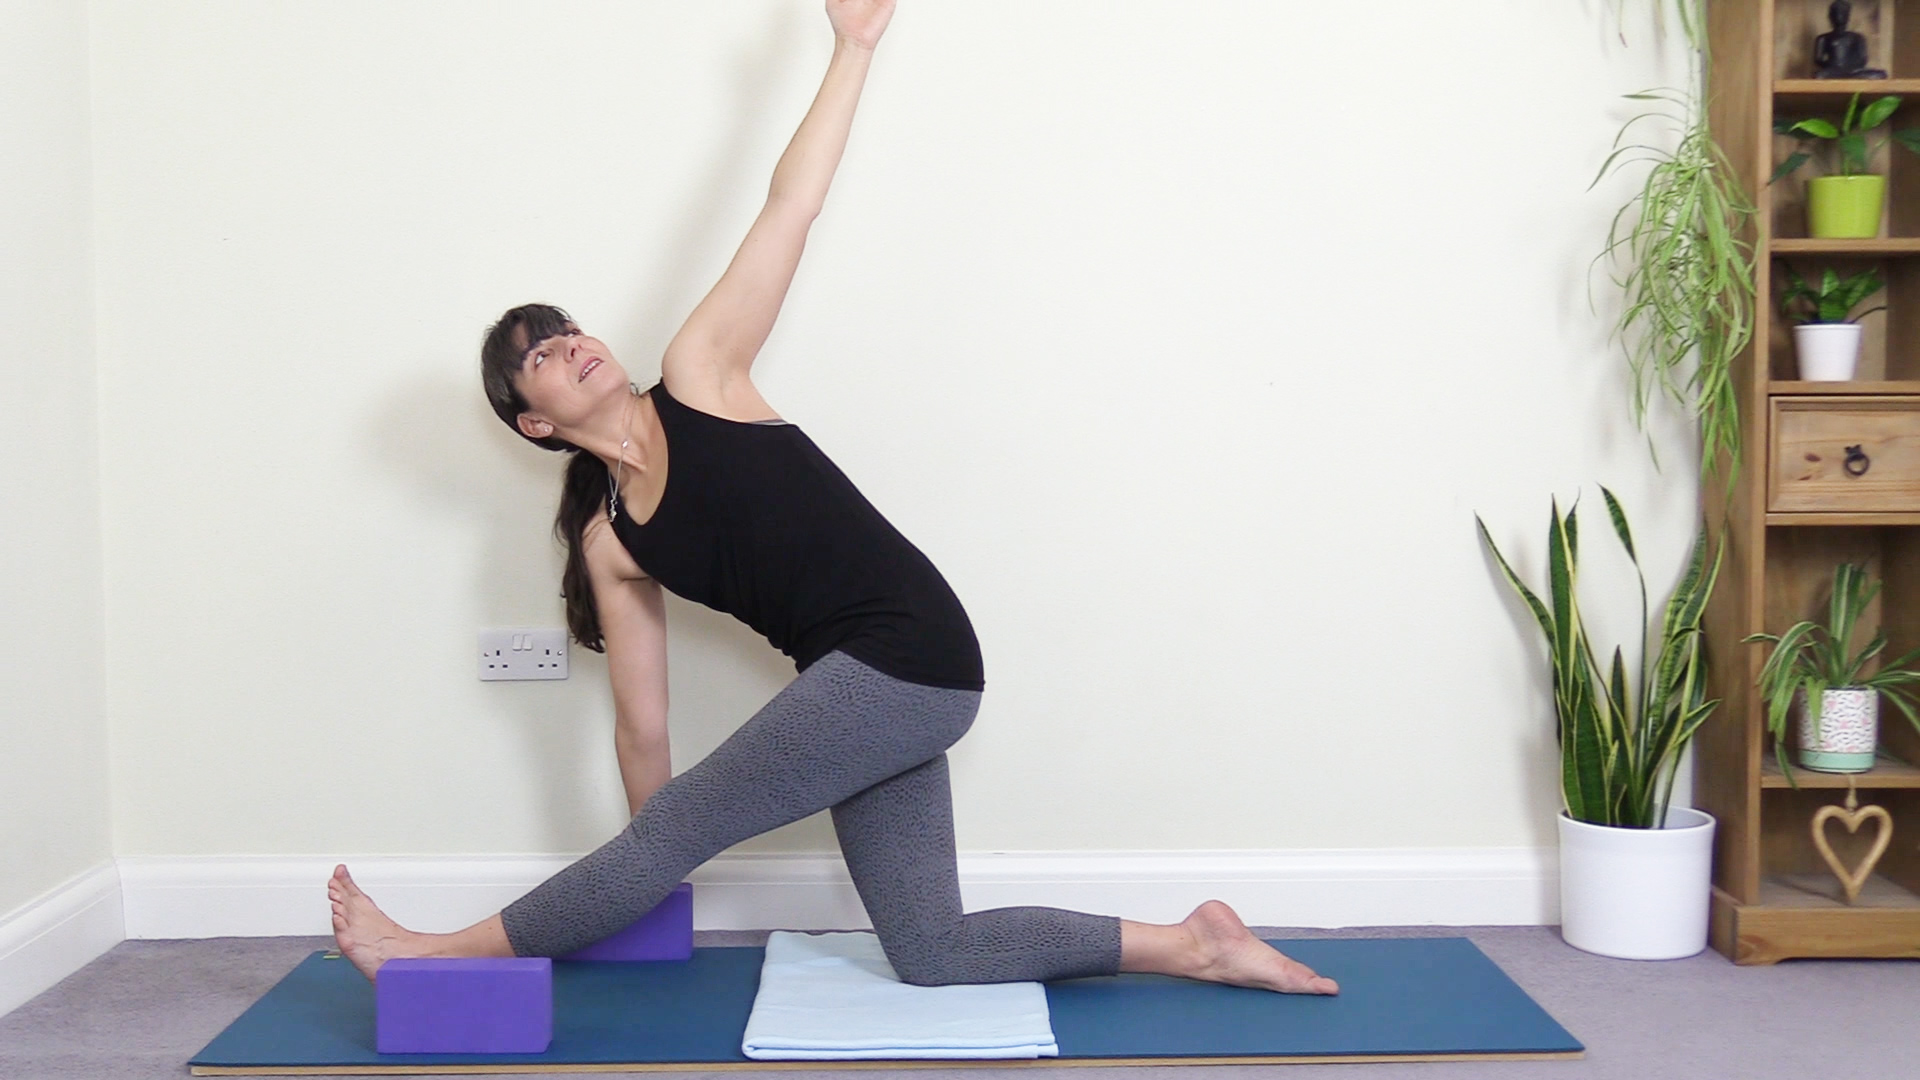 Evolation Yoga Studio Atlanta - HALF FRONT SPLITS POSE ARDHA HANUMANASANA  BENEFITS A perfect warm-up pose with many benefits: Stretches your hips,  hamstrings, calves, and low back. Strengthens your hamstrings. A proper